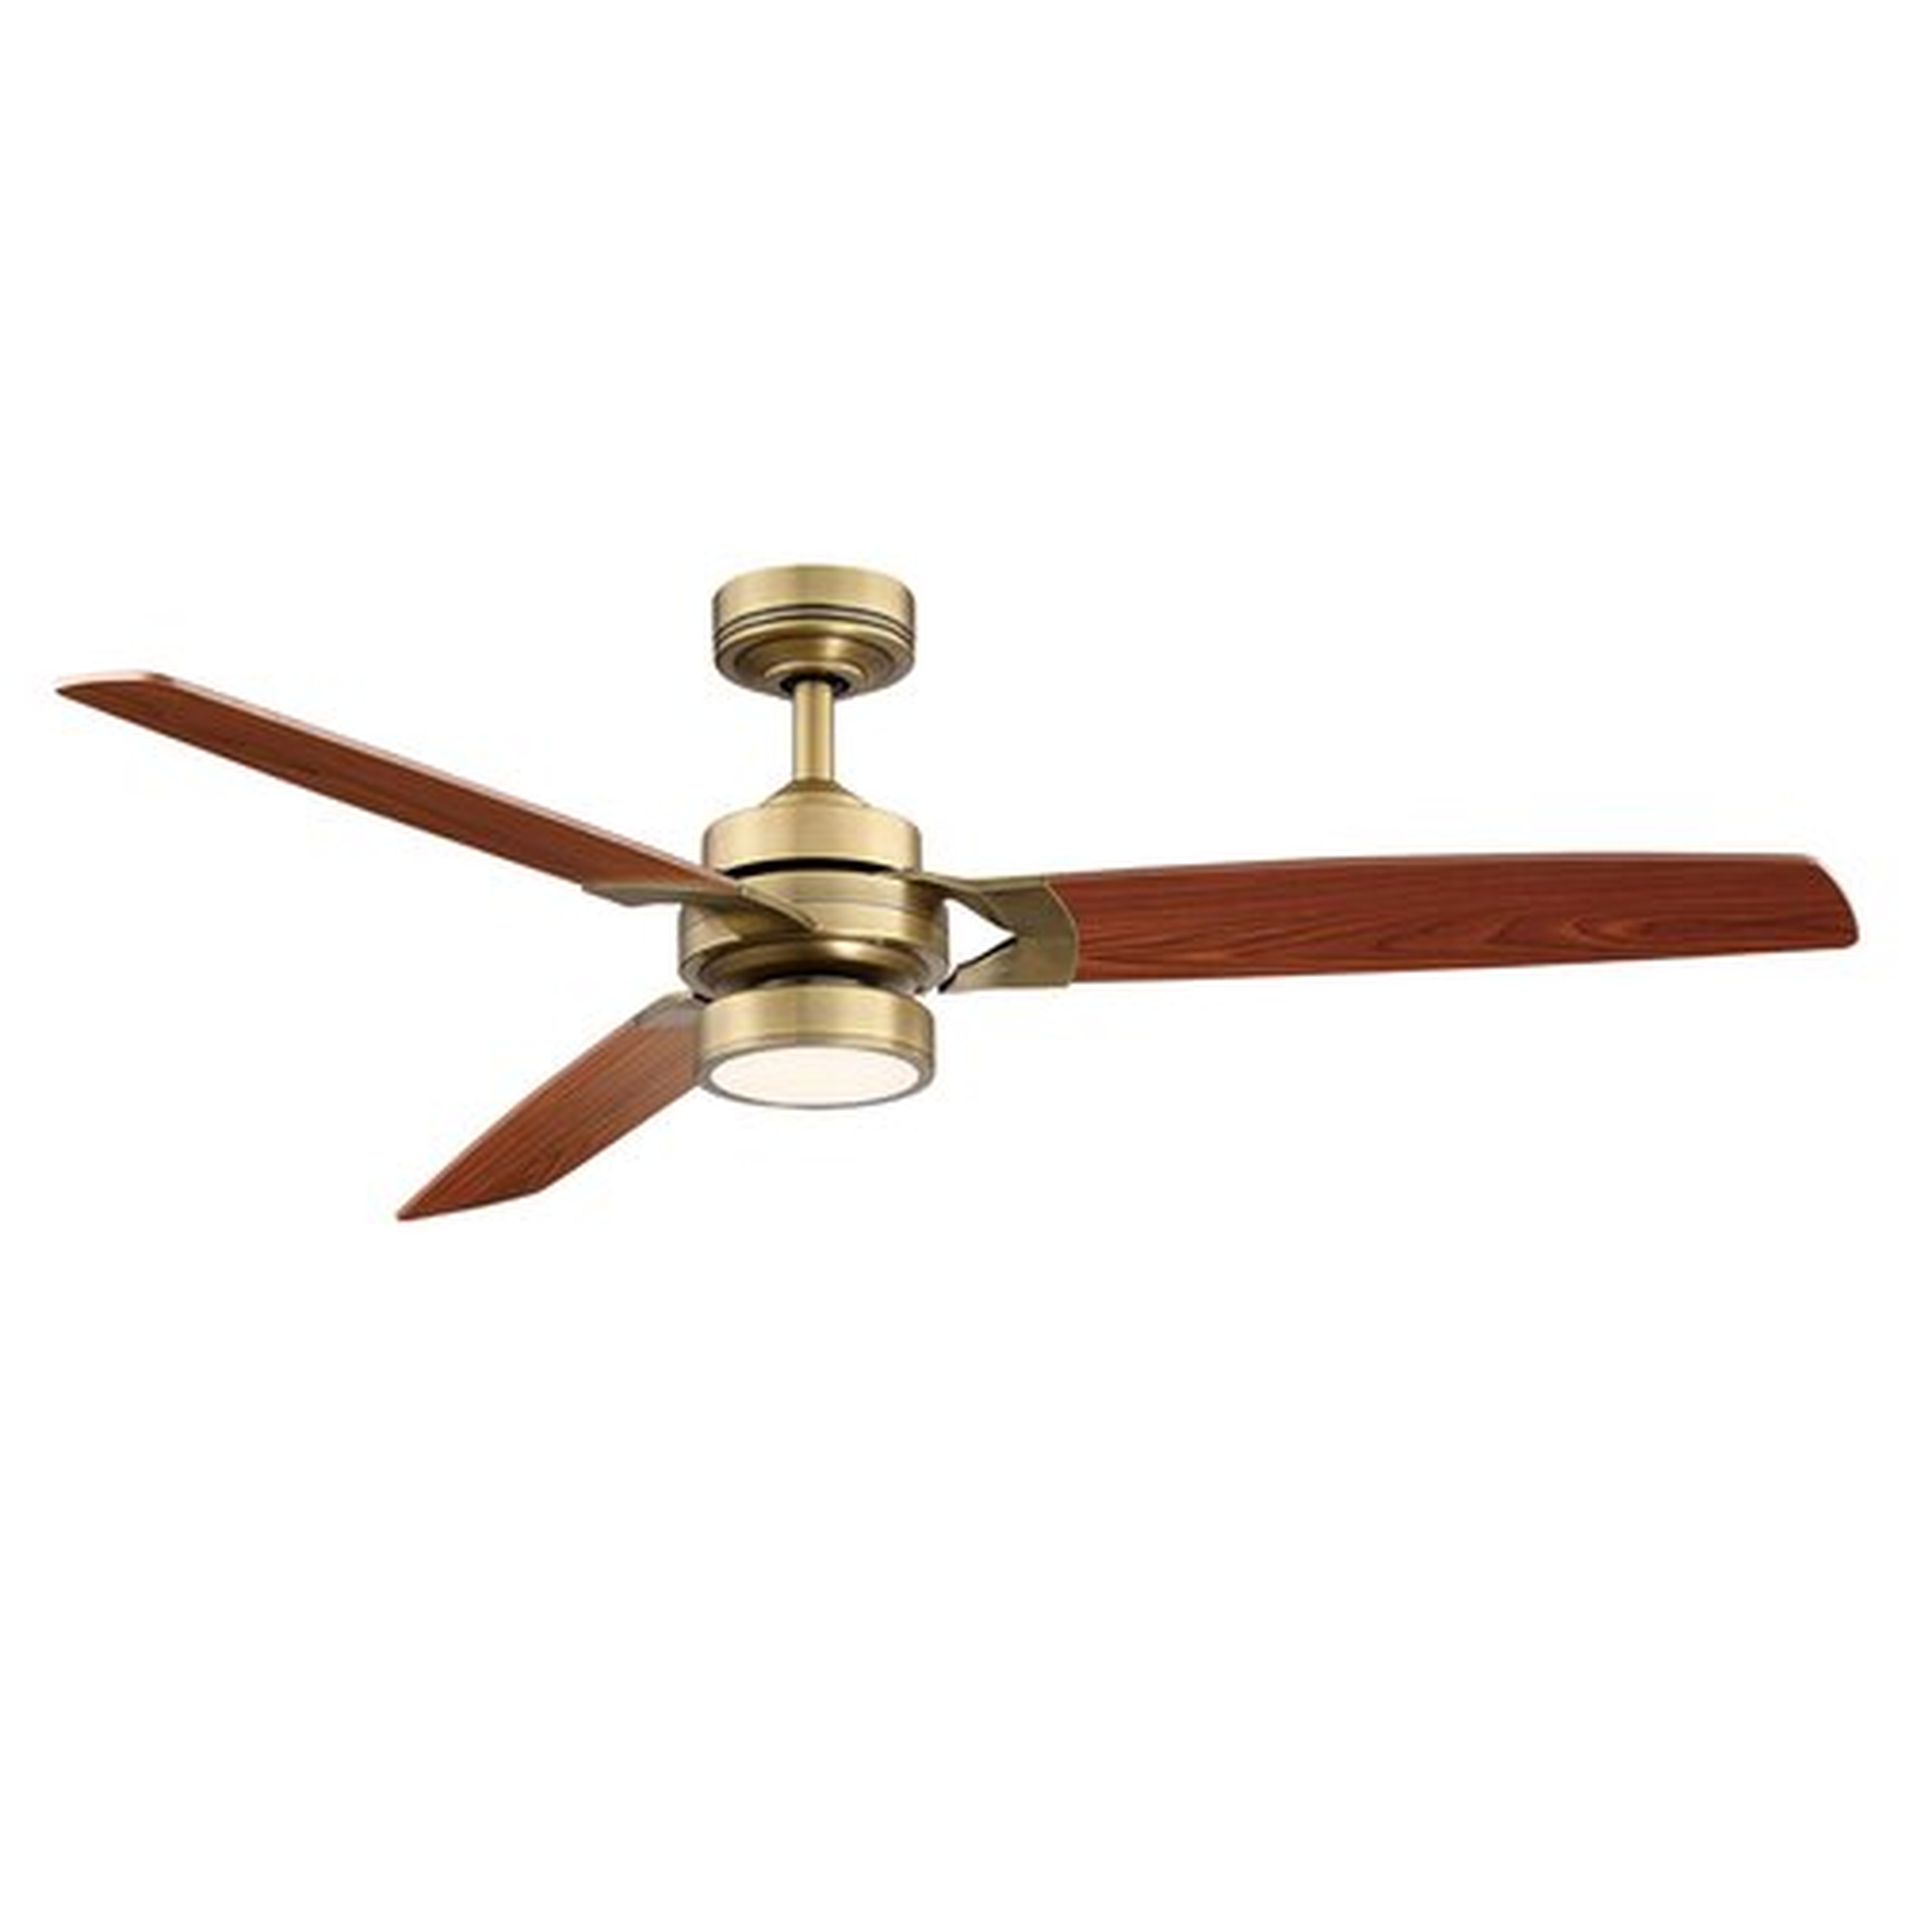 Gaye 3 Blade LED Ceiling Fan with Remote, Light Kit Included - Wayfair